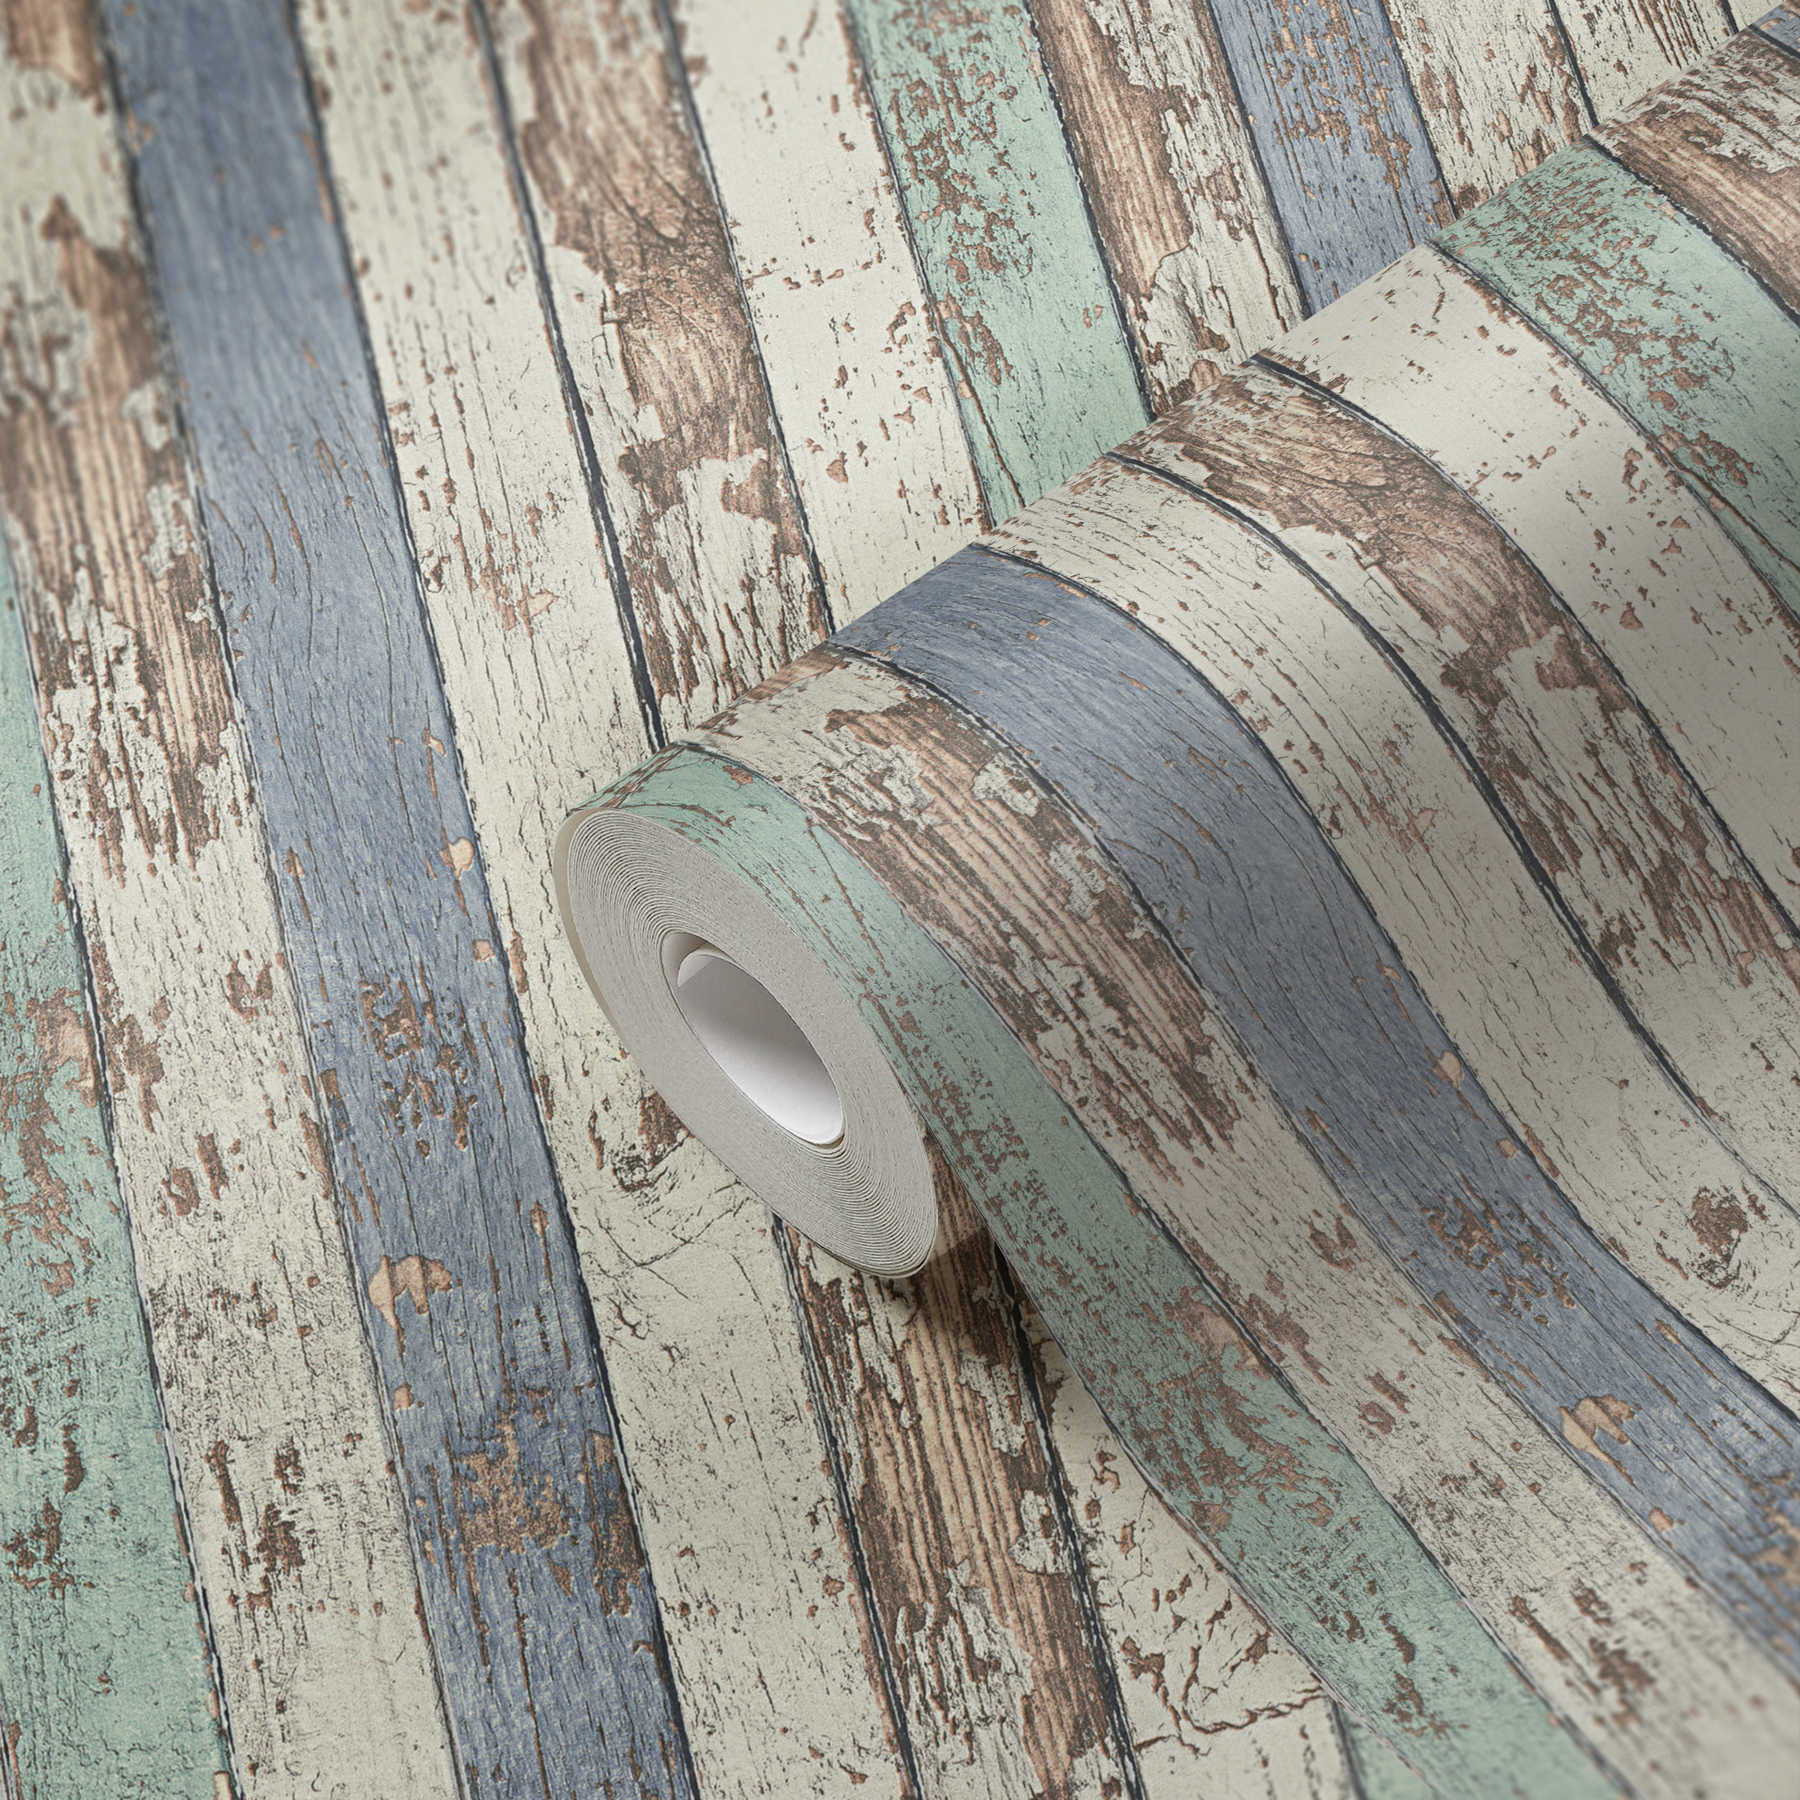             Wooden wallpaper with colourful board motif in shabby chic style - white, brown, blue
        